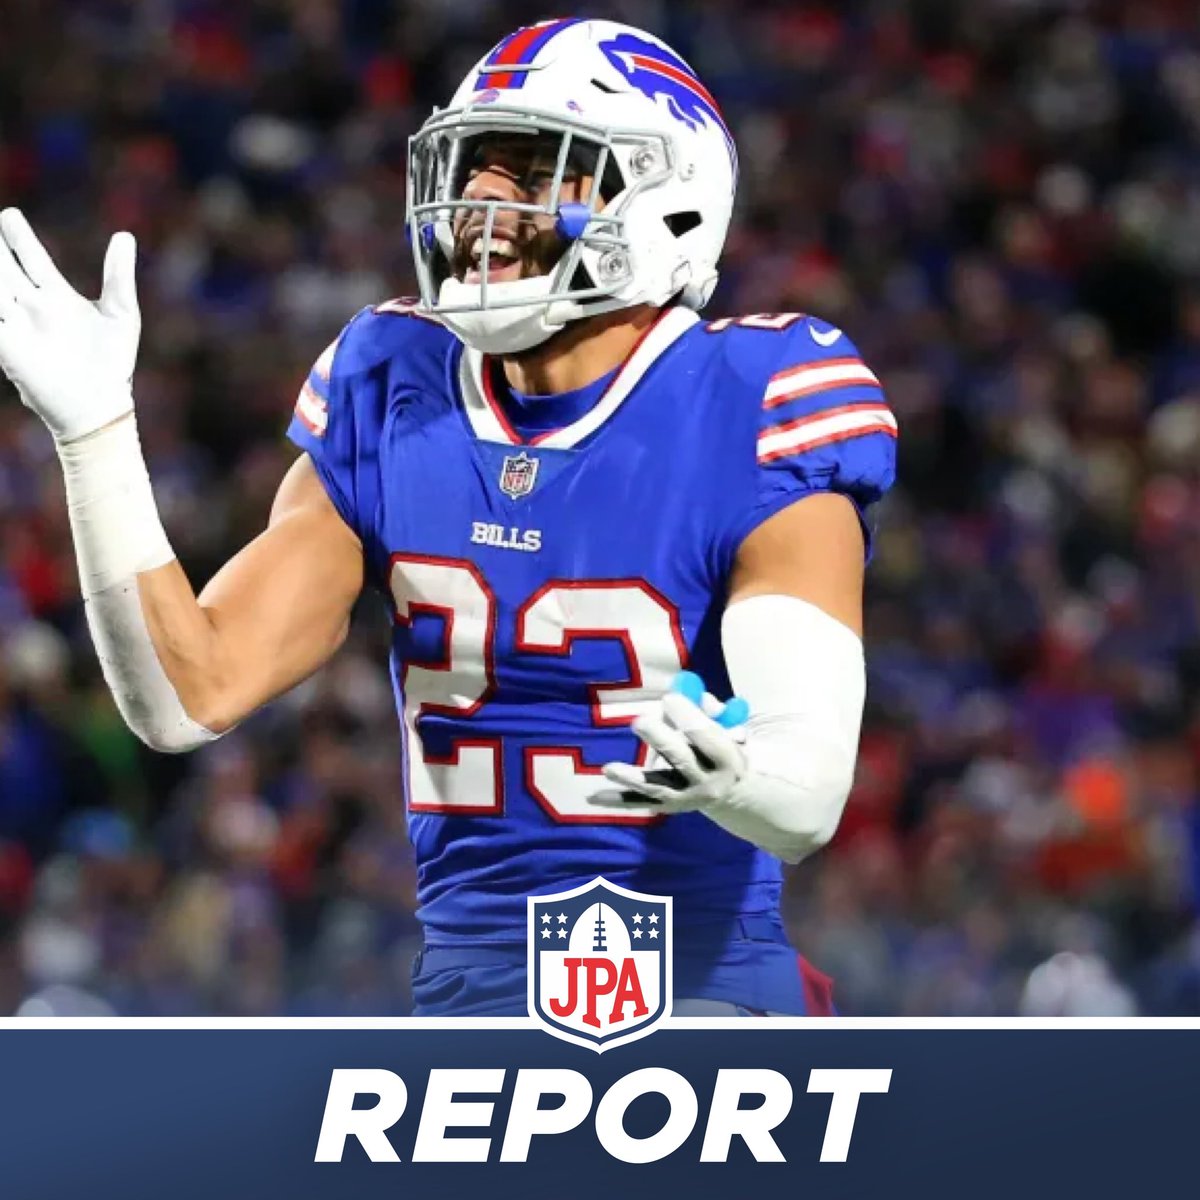 𝗥𝗘𝗣𝗢𝗥𝗧: Free agent safety Micah Hyde says he will either play for the #Bills in 2024 or retire, he told @SalSports “It’s Bills or retire.”